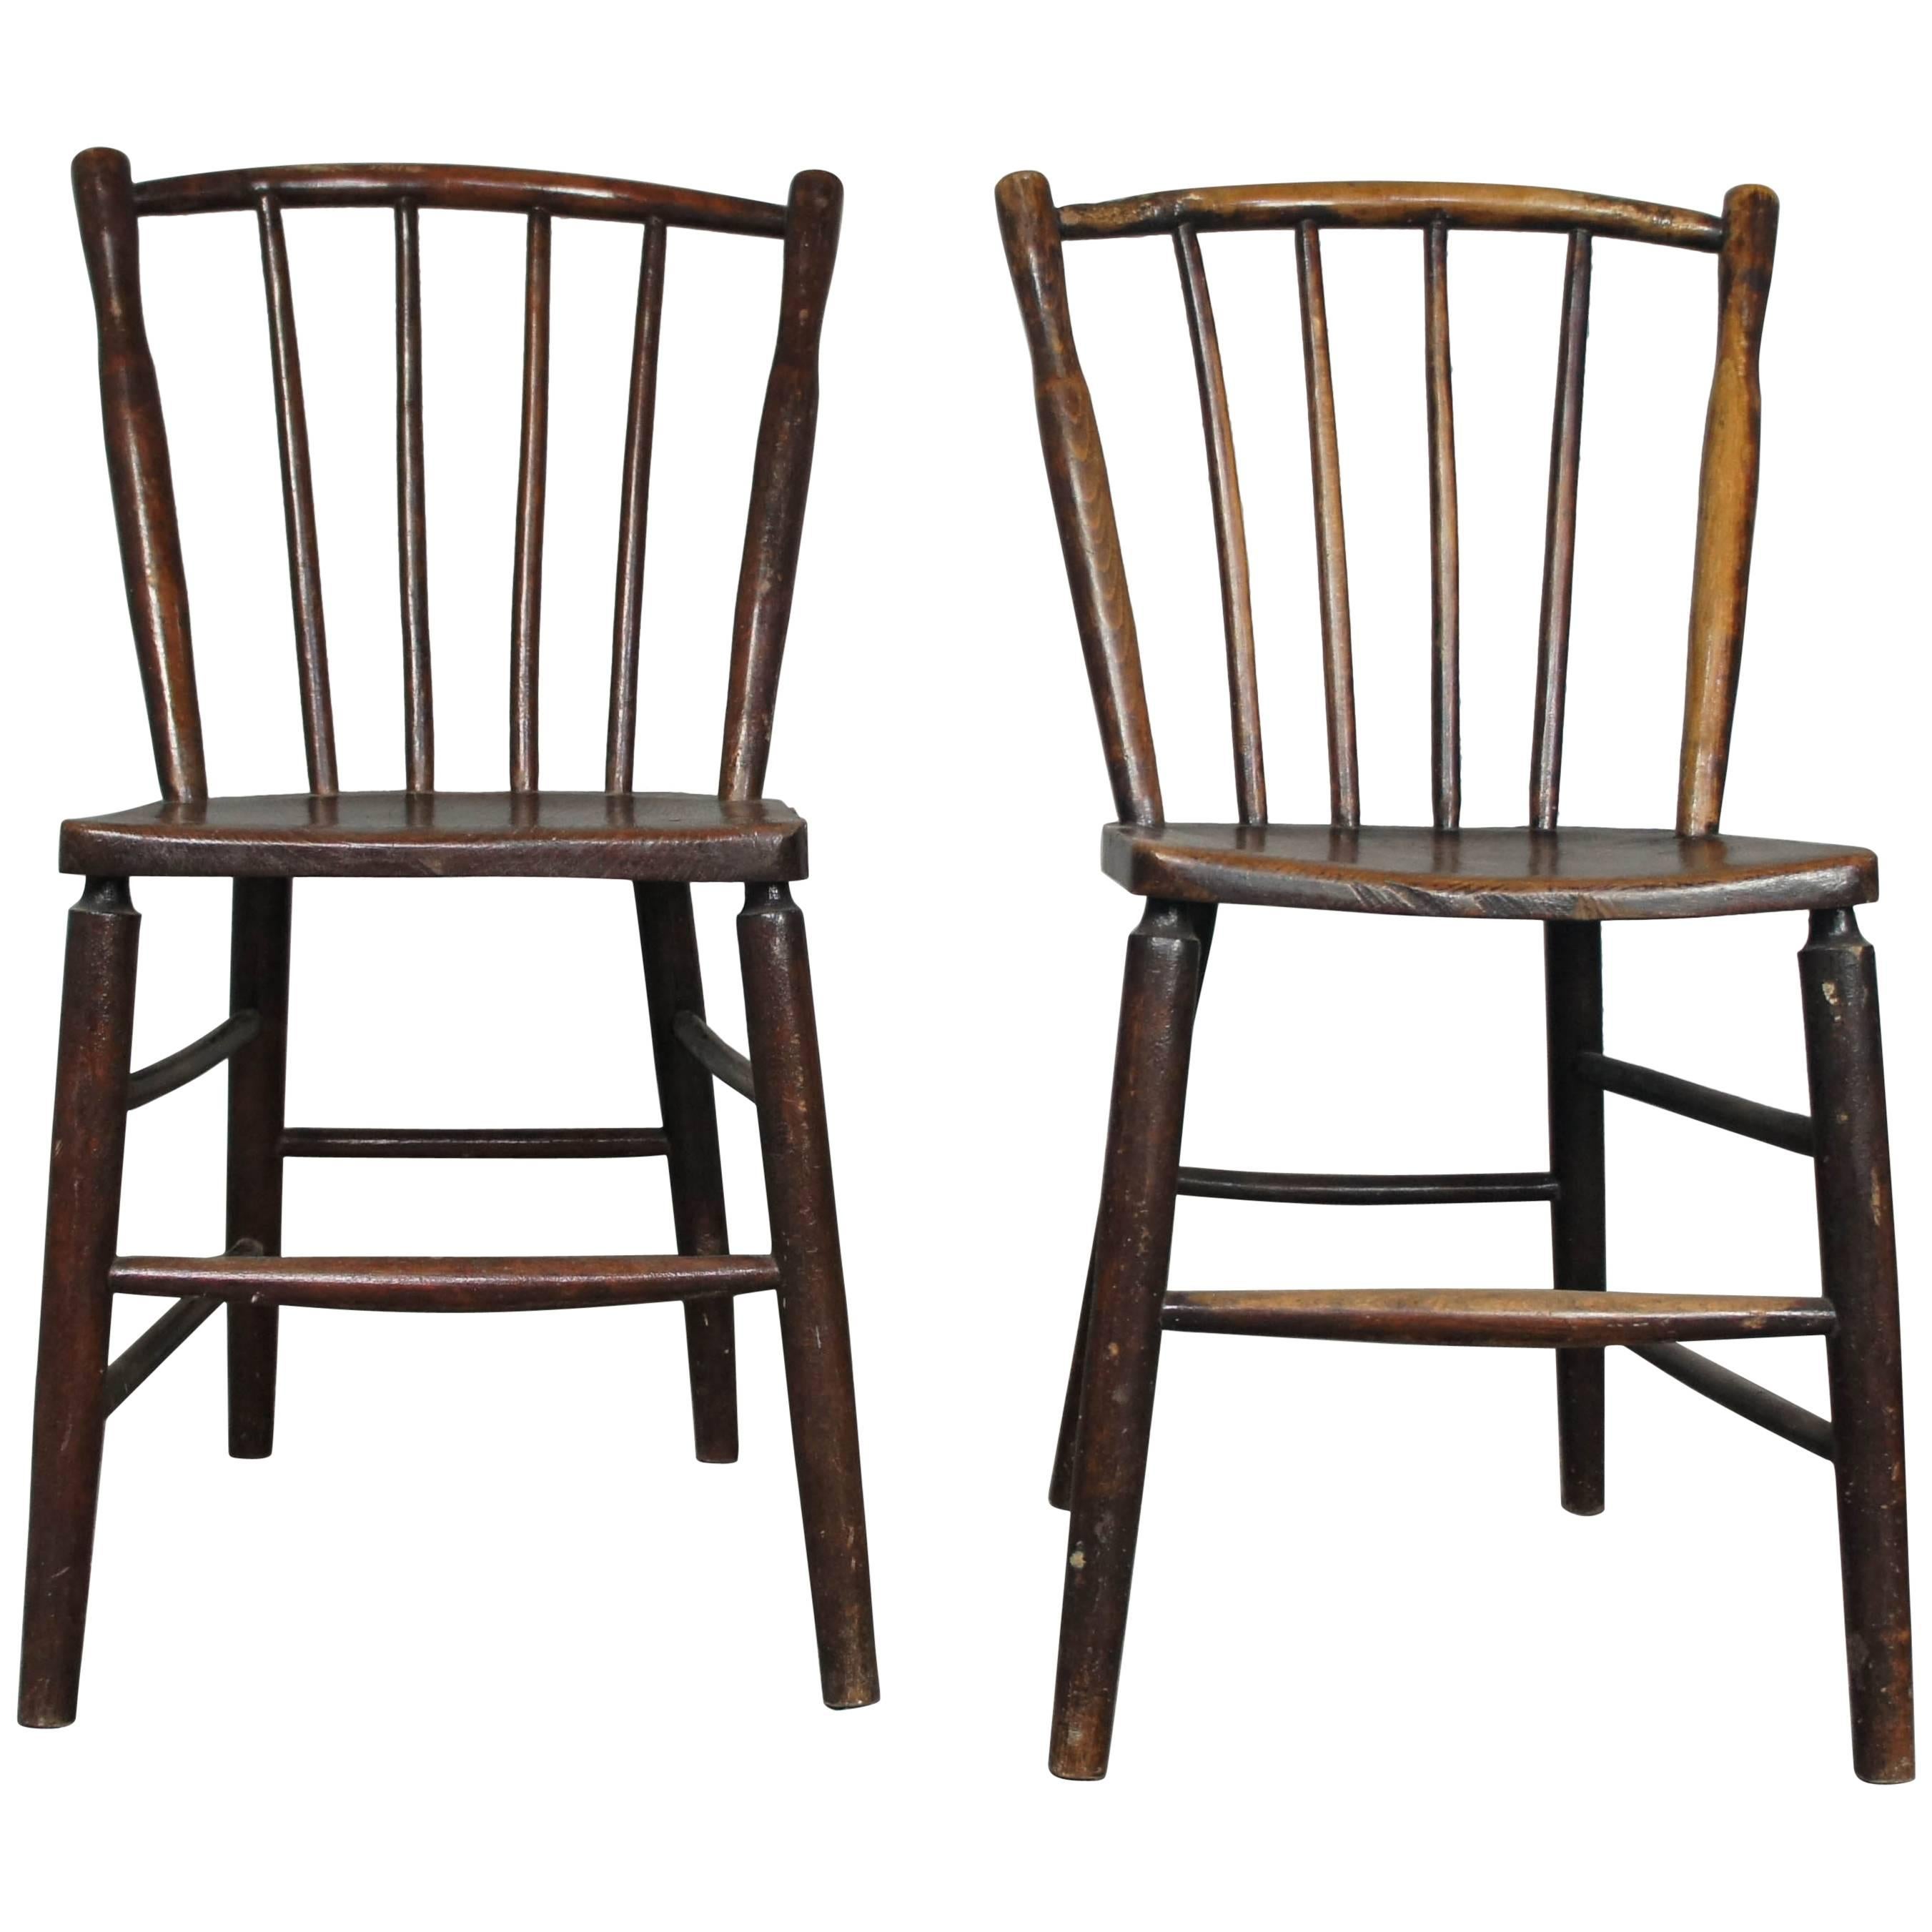 Pair of Early Ash and Beech Irish Country Spindle Back Dining Chairs